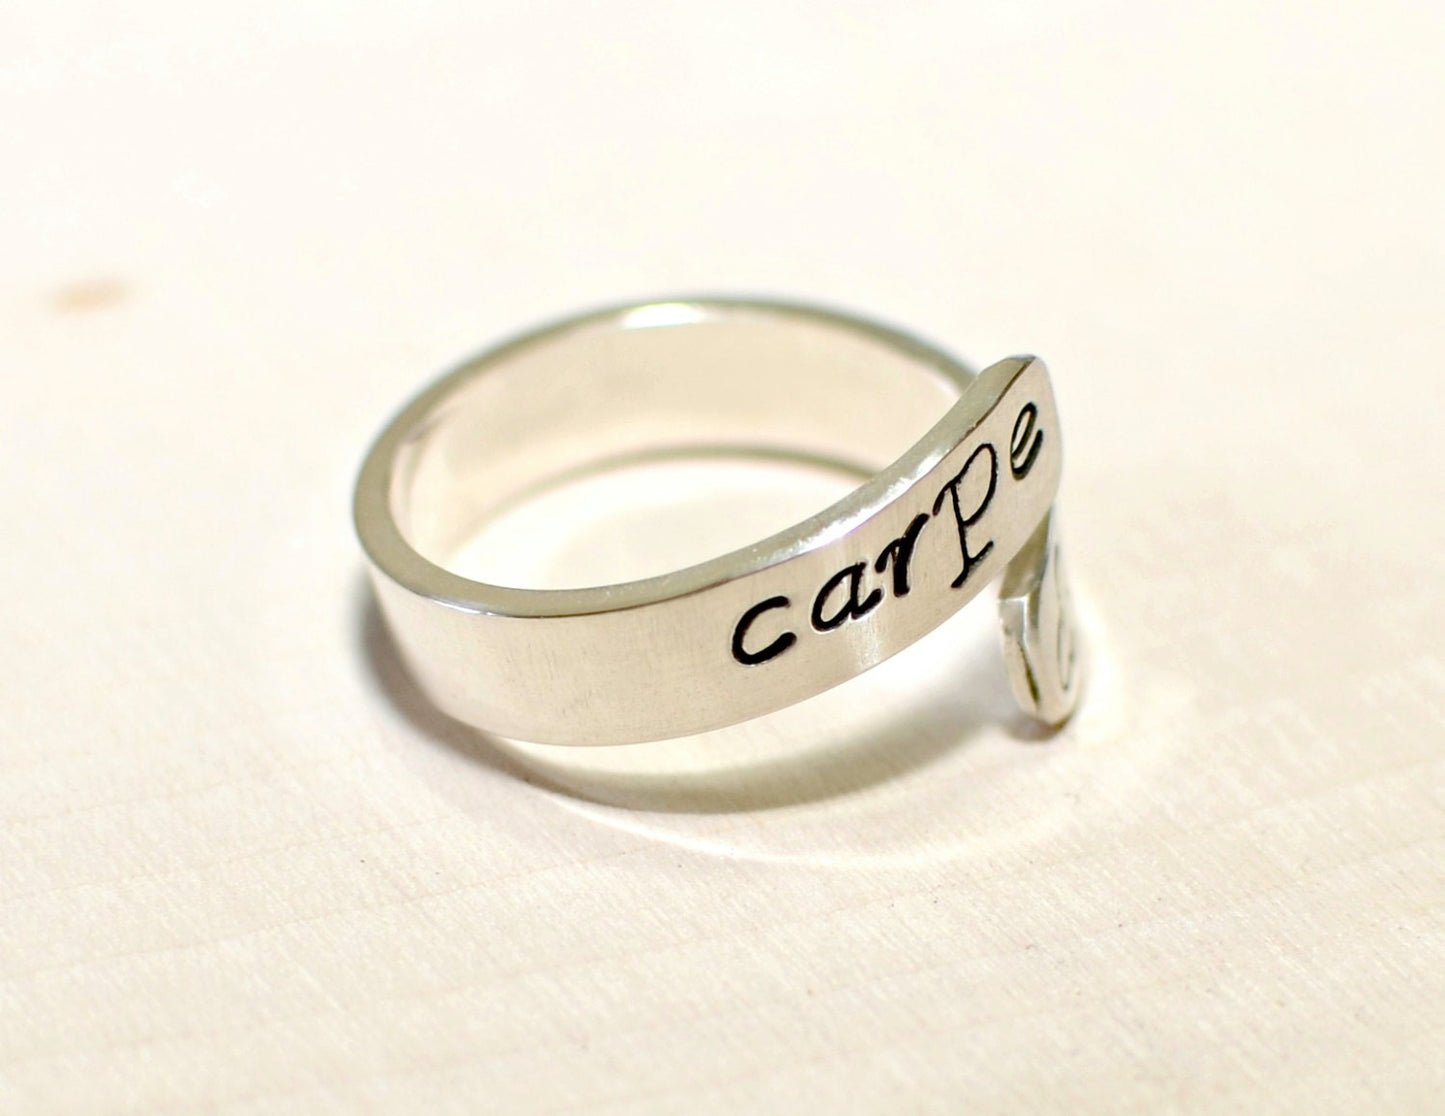 Carpe Diem Wrap Around Bypass Ring in 925 Sterling Silver